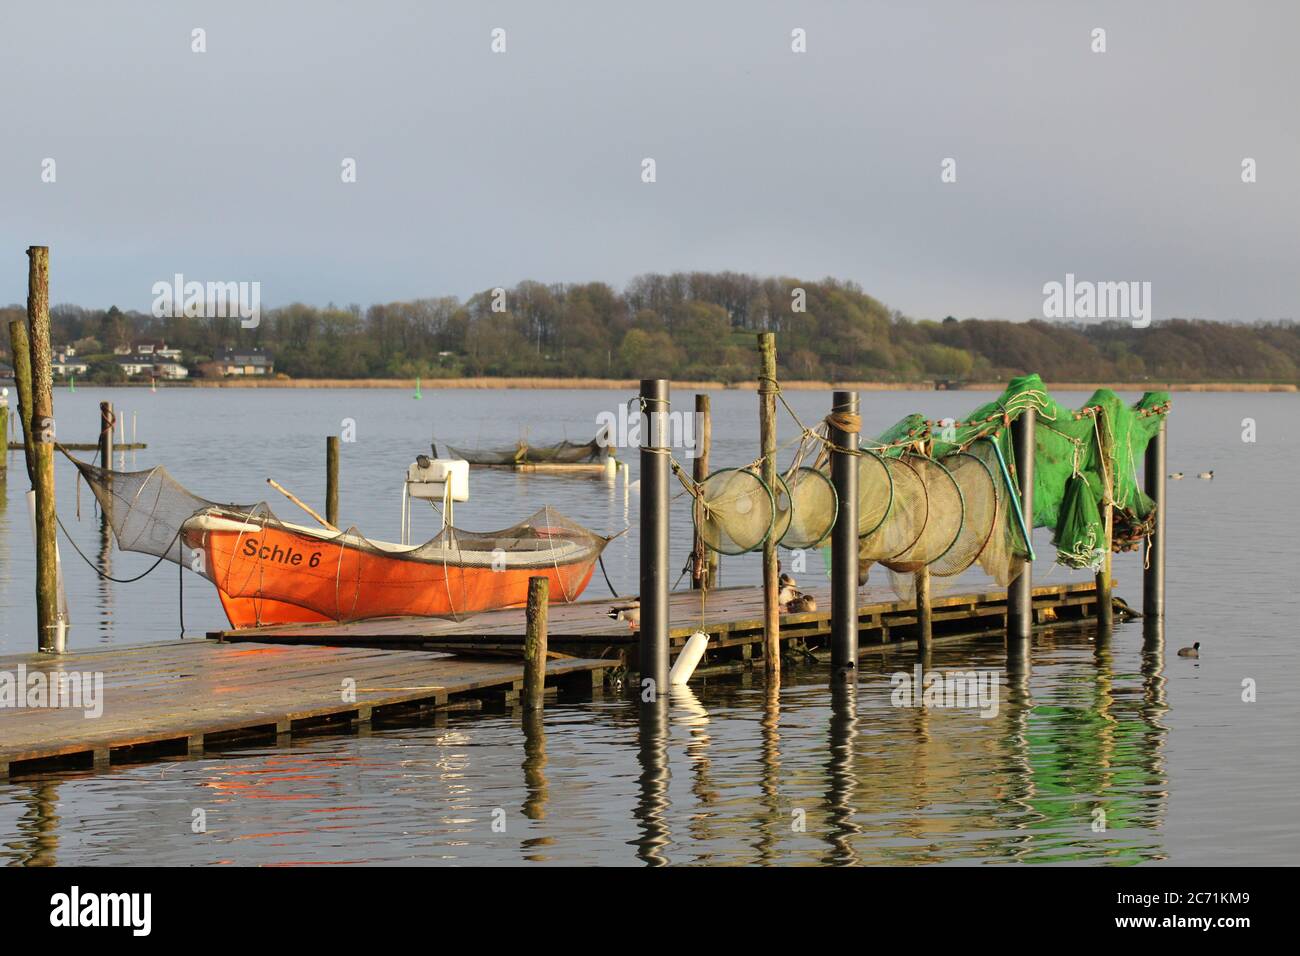 The Schlei is a small inlet of the Baltic Sea, that reaches far into the land; in Schleswig some fishermen are still active with small boats. Stock Photo